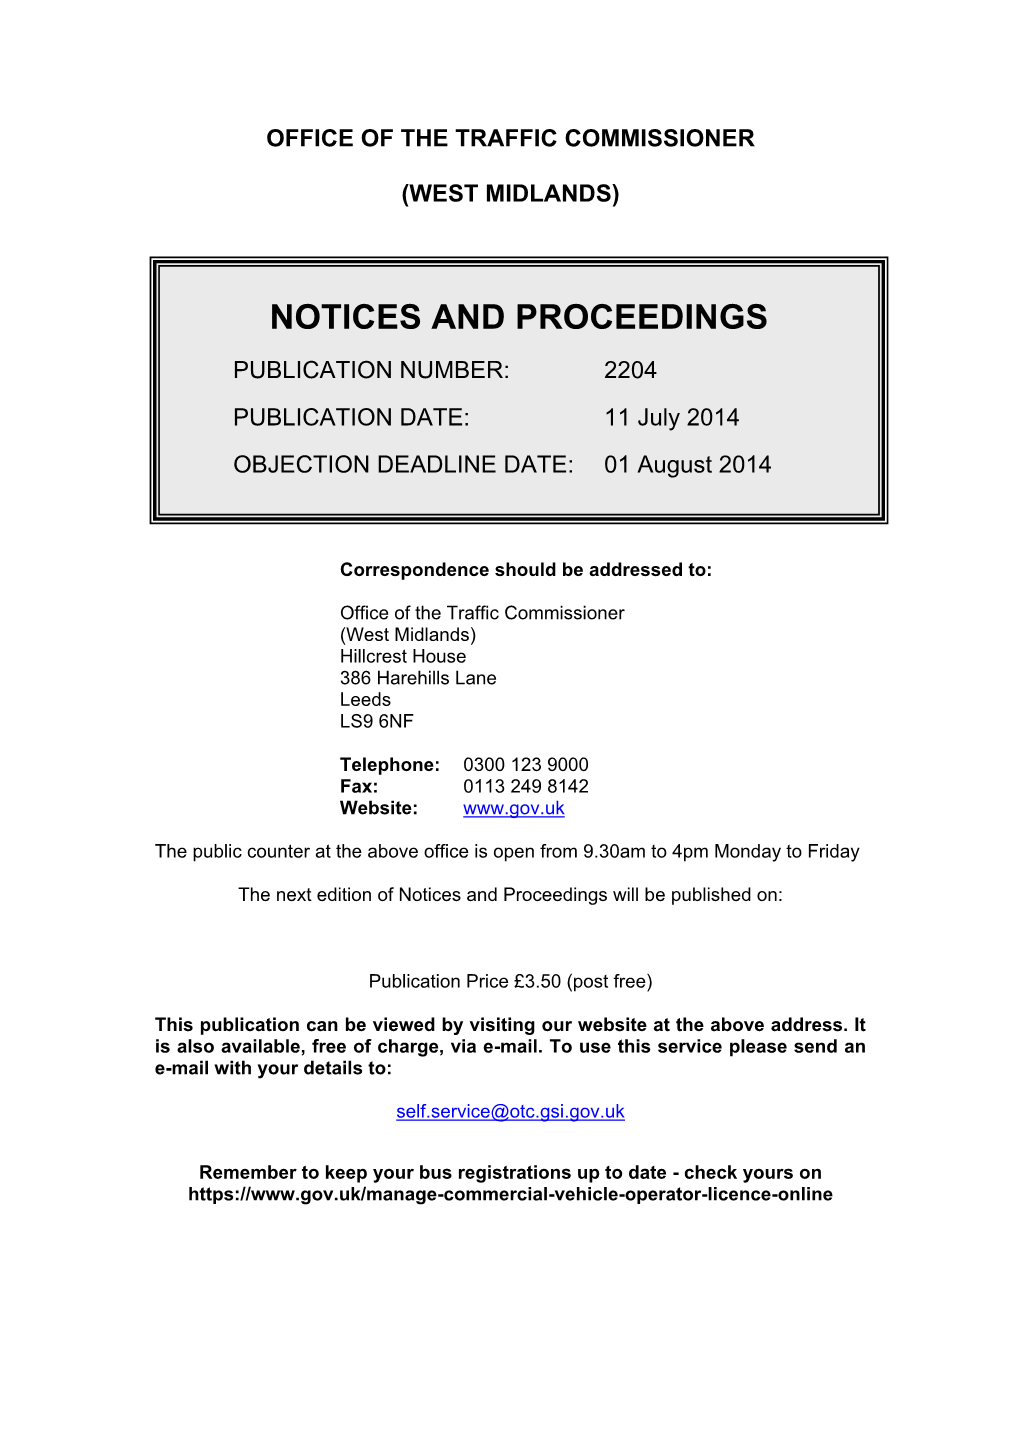 Notices and Proceedings 11 July 2014